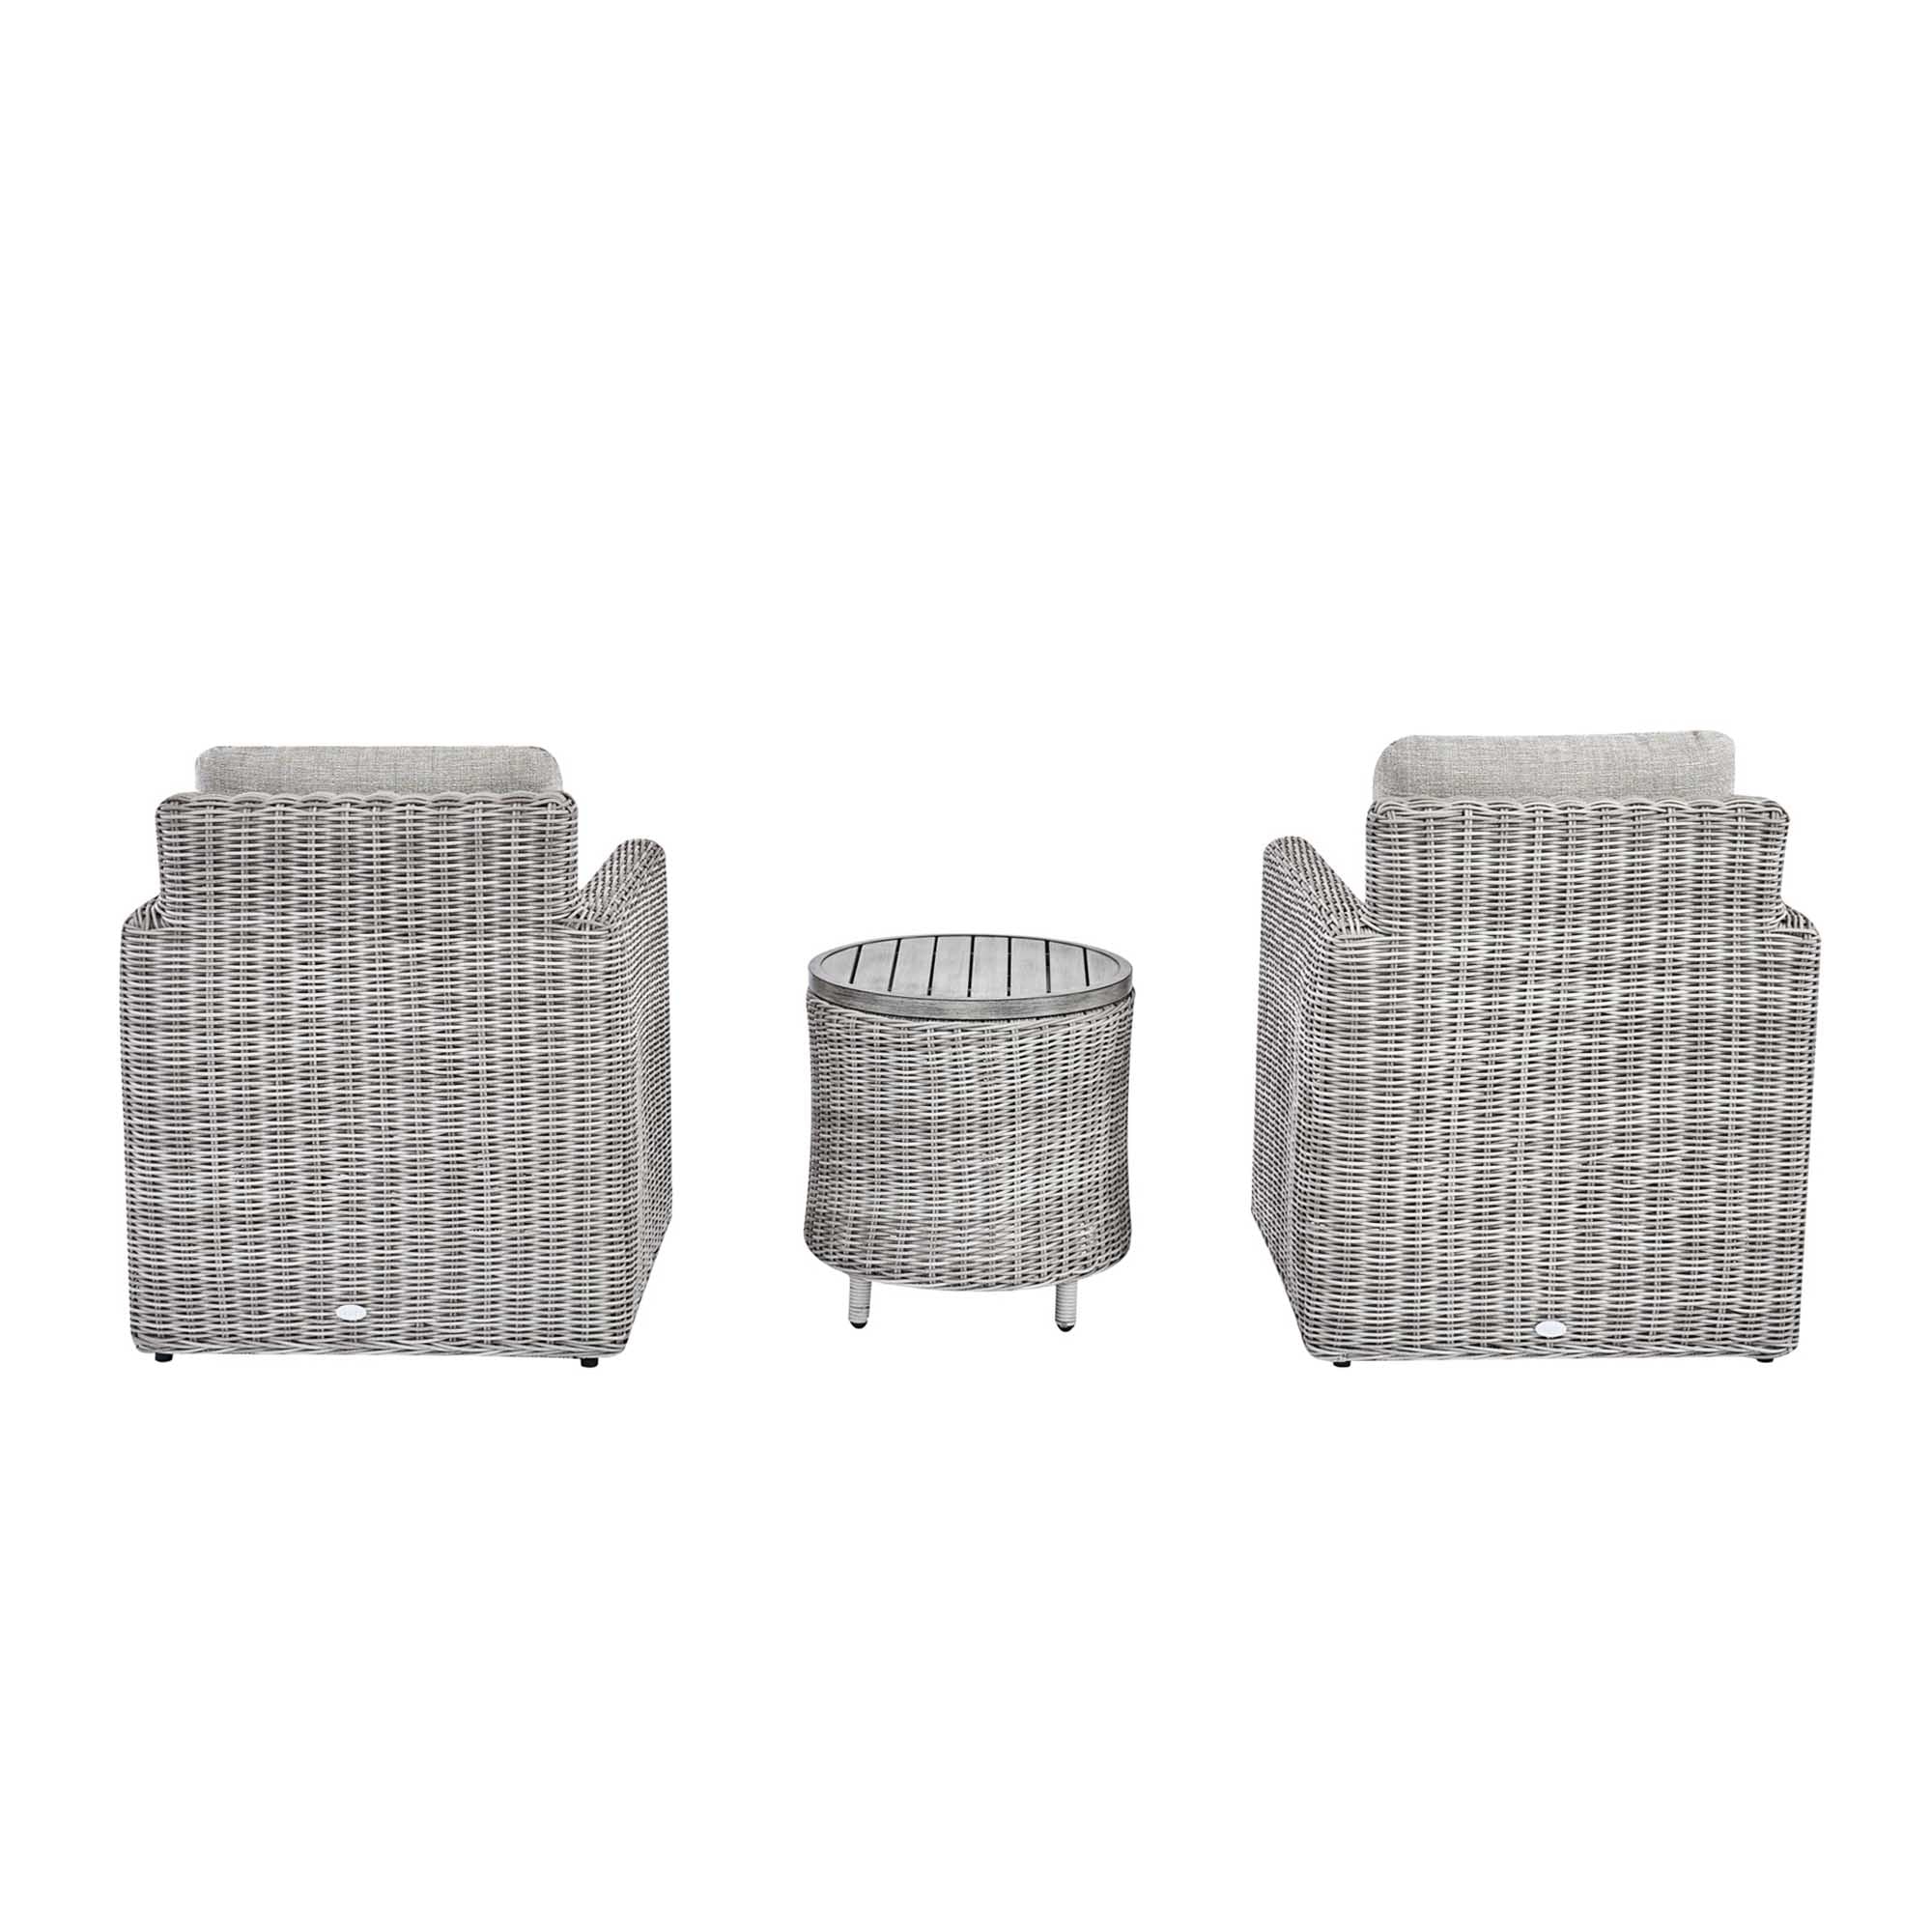 Bellagio Round Wicker Bistro Set with Rising Side Table, Light Grey